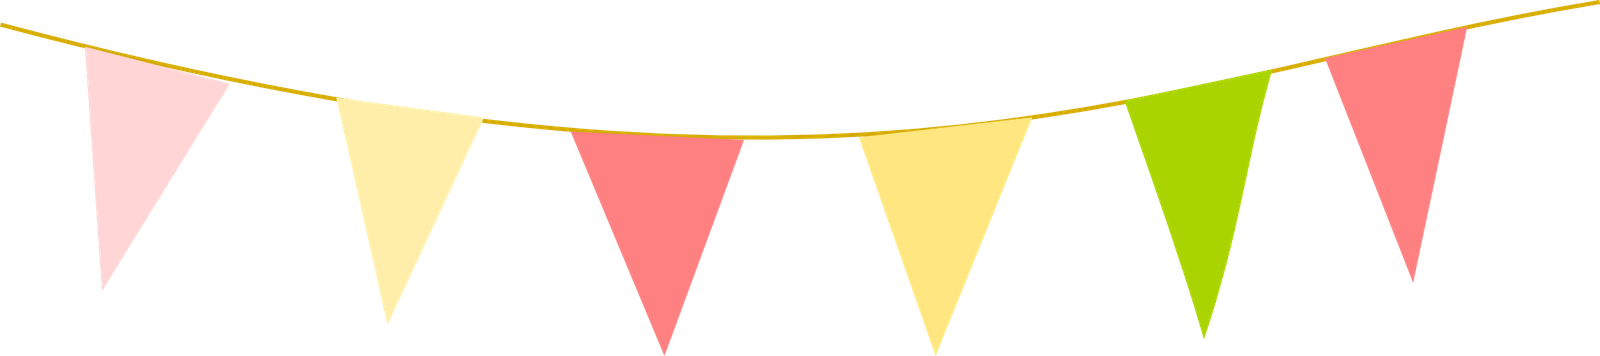 Free Bunting Flag Clipart - ClipArt Best